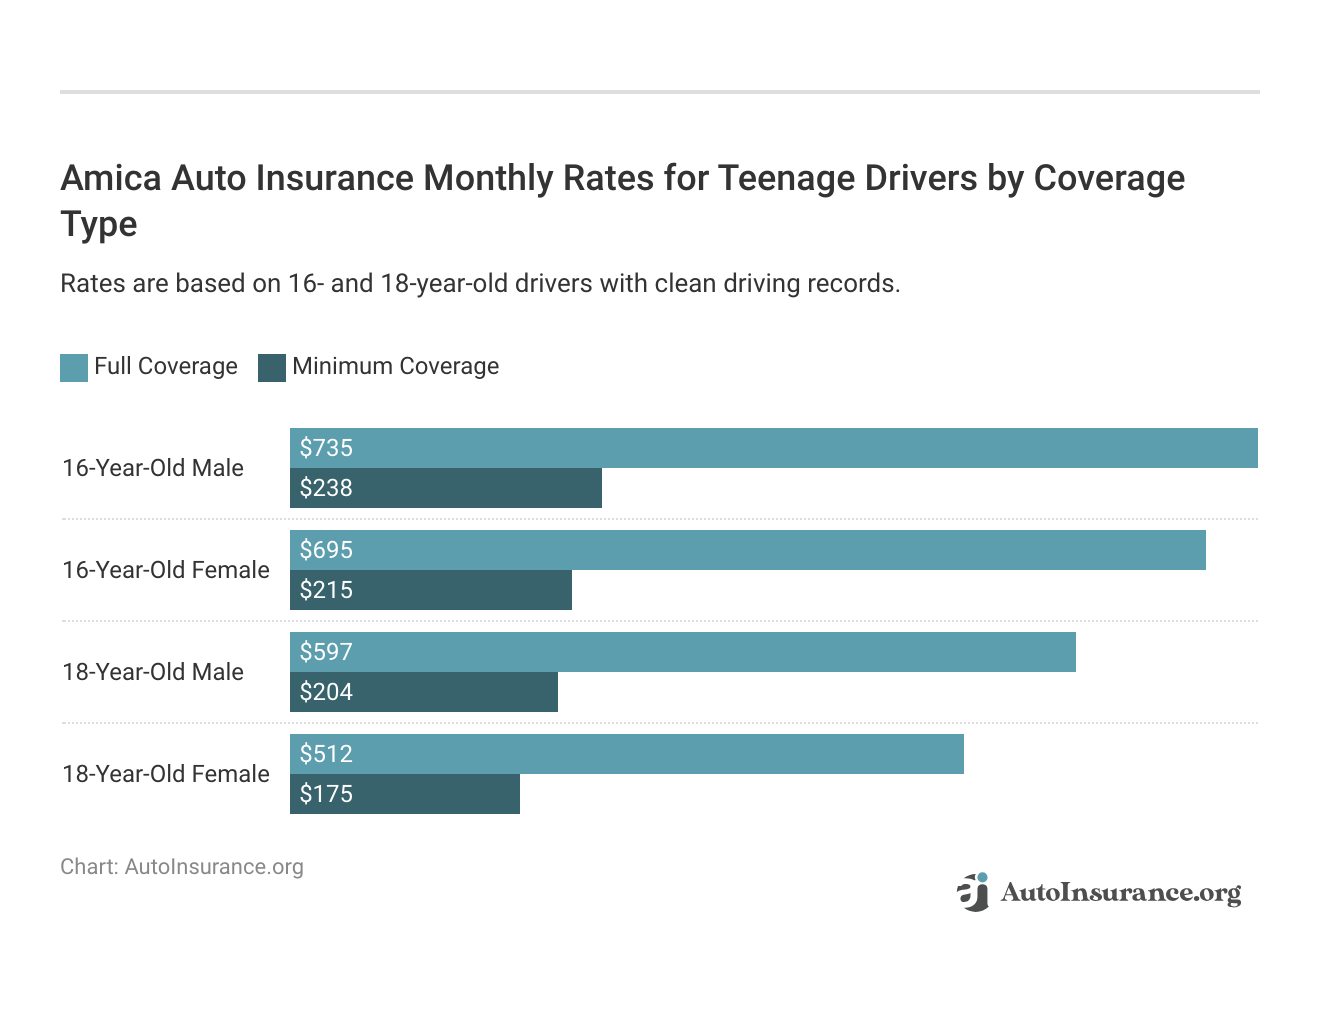 <h3>Amica Auto Insurance Monthly Rates for Teenage Drivers by Coverage Type</h3>